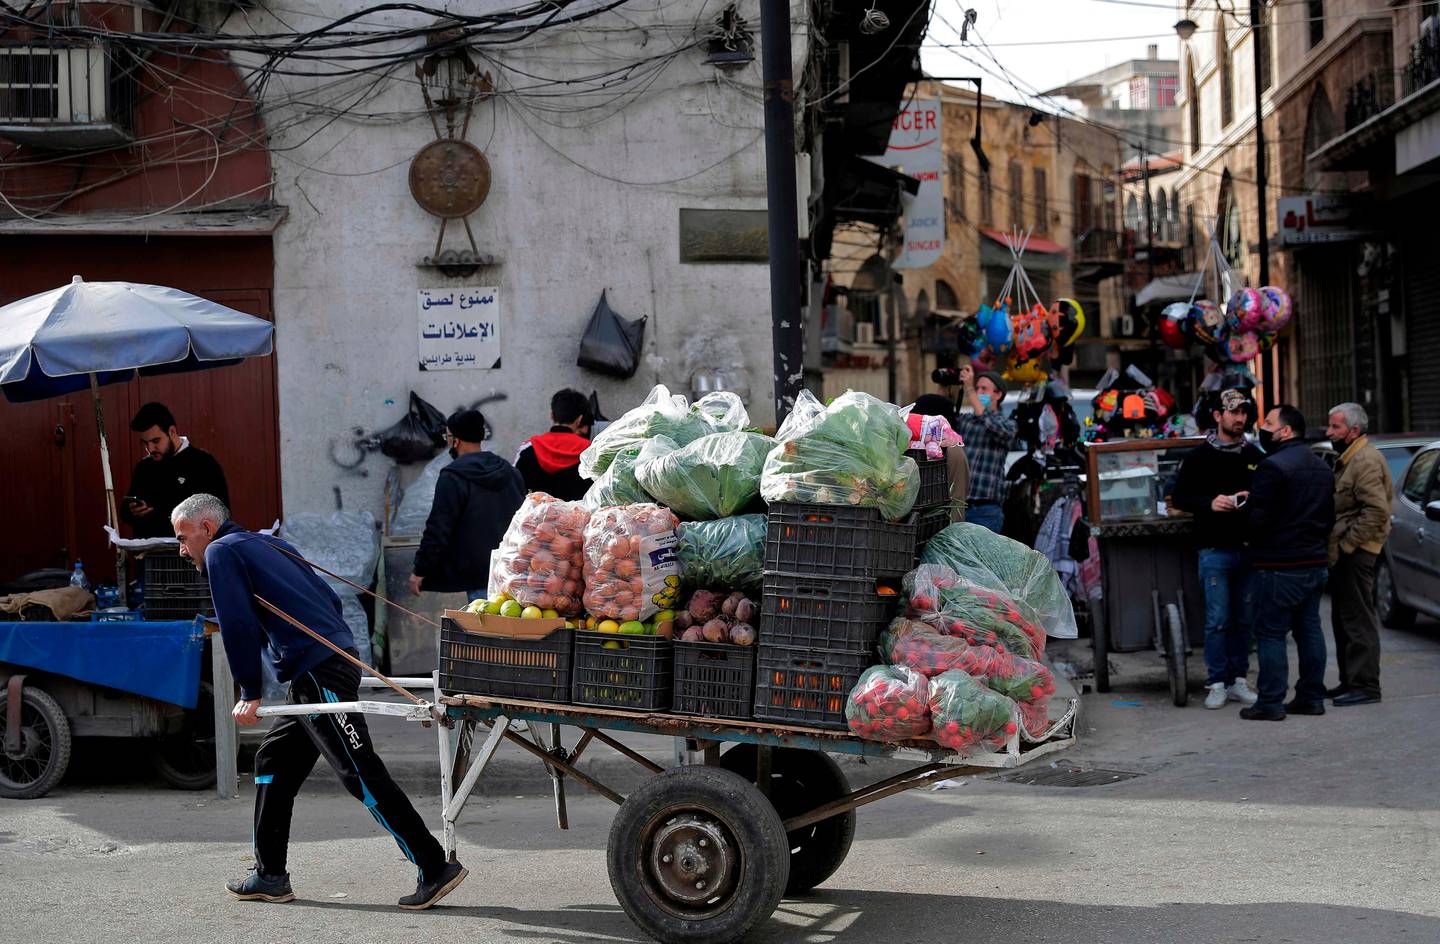 An ambulant vendor pulls his handcart in the Lebanese coastal city of Tripoli, north of Beirut, on January 26, 2021. - Lebanon has imposed a round-the-clock curfew nationwide since January 14, barred non-essential workers from leaving their homes and restricted grocery shopping to deliveries. On paper, its Covid-19 restrictions are among the strictest in the world, but in reality grinding poverty is pushing many back onto the streets to eke out a living. (Photo by JOSEPH EID / AFP)